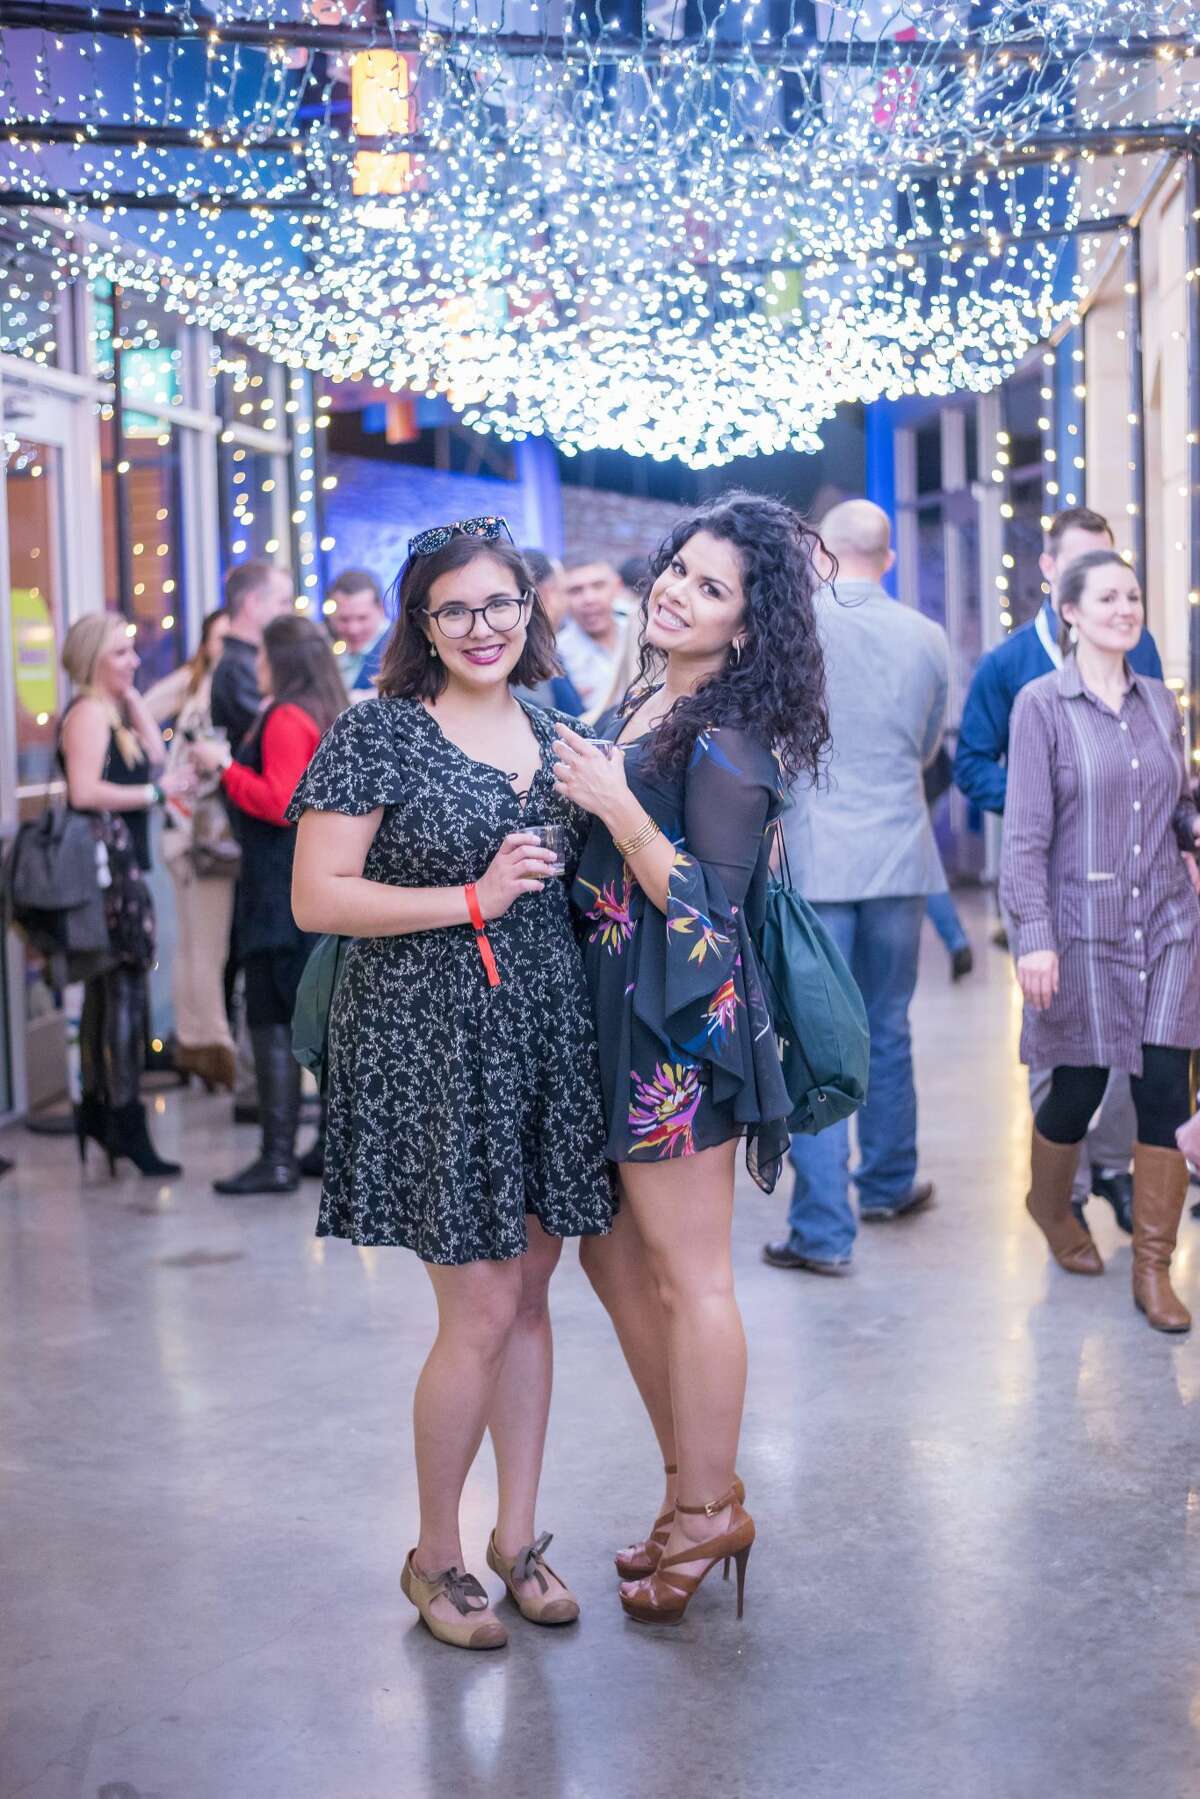 Cocktails and adults took over the DoSeum on Thursday, Jan. 11, 2018, to celebrate the opening night of the annual San Antonio Cocktail Conference. The sold-out event is just one of several escapades planned for the five-day conference held at venues across the city.